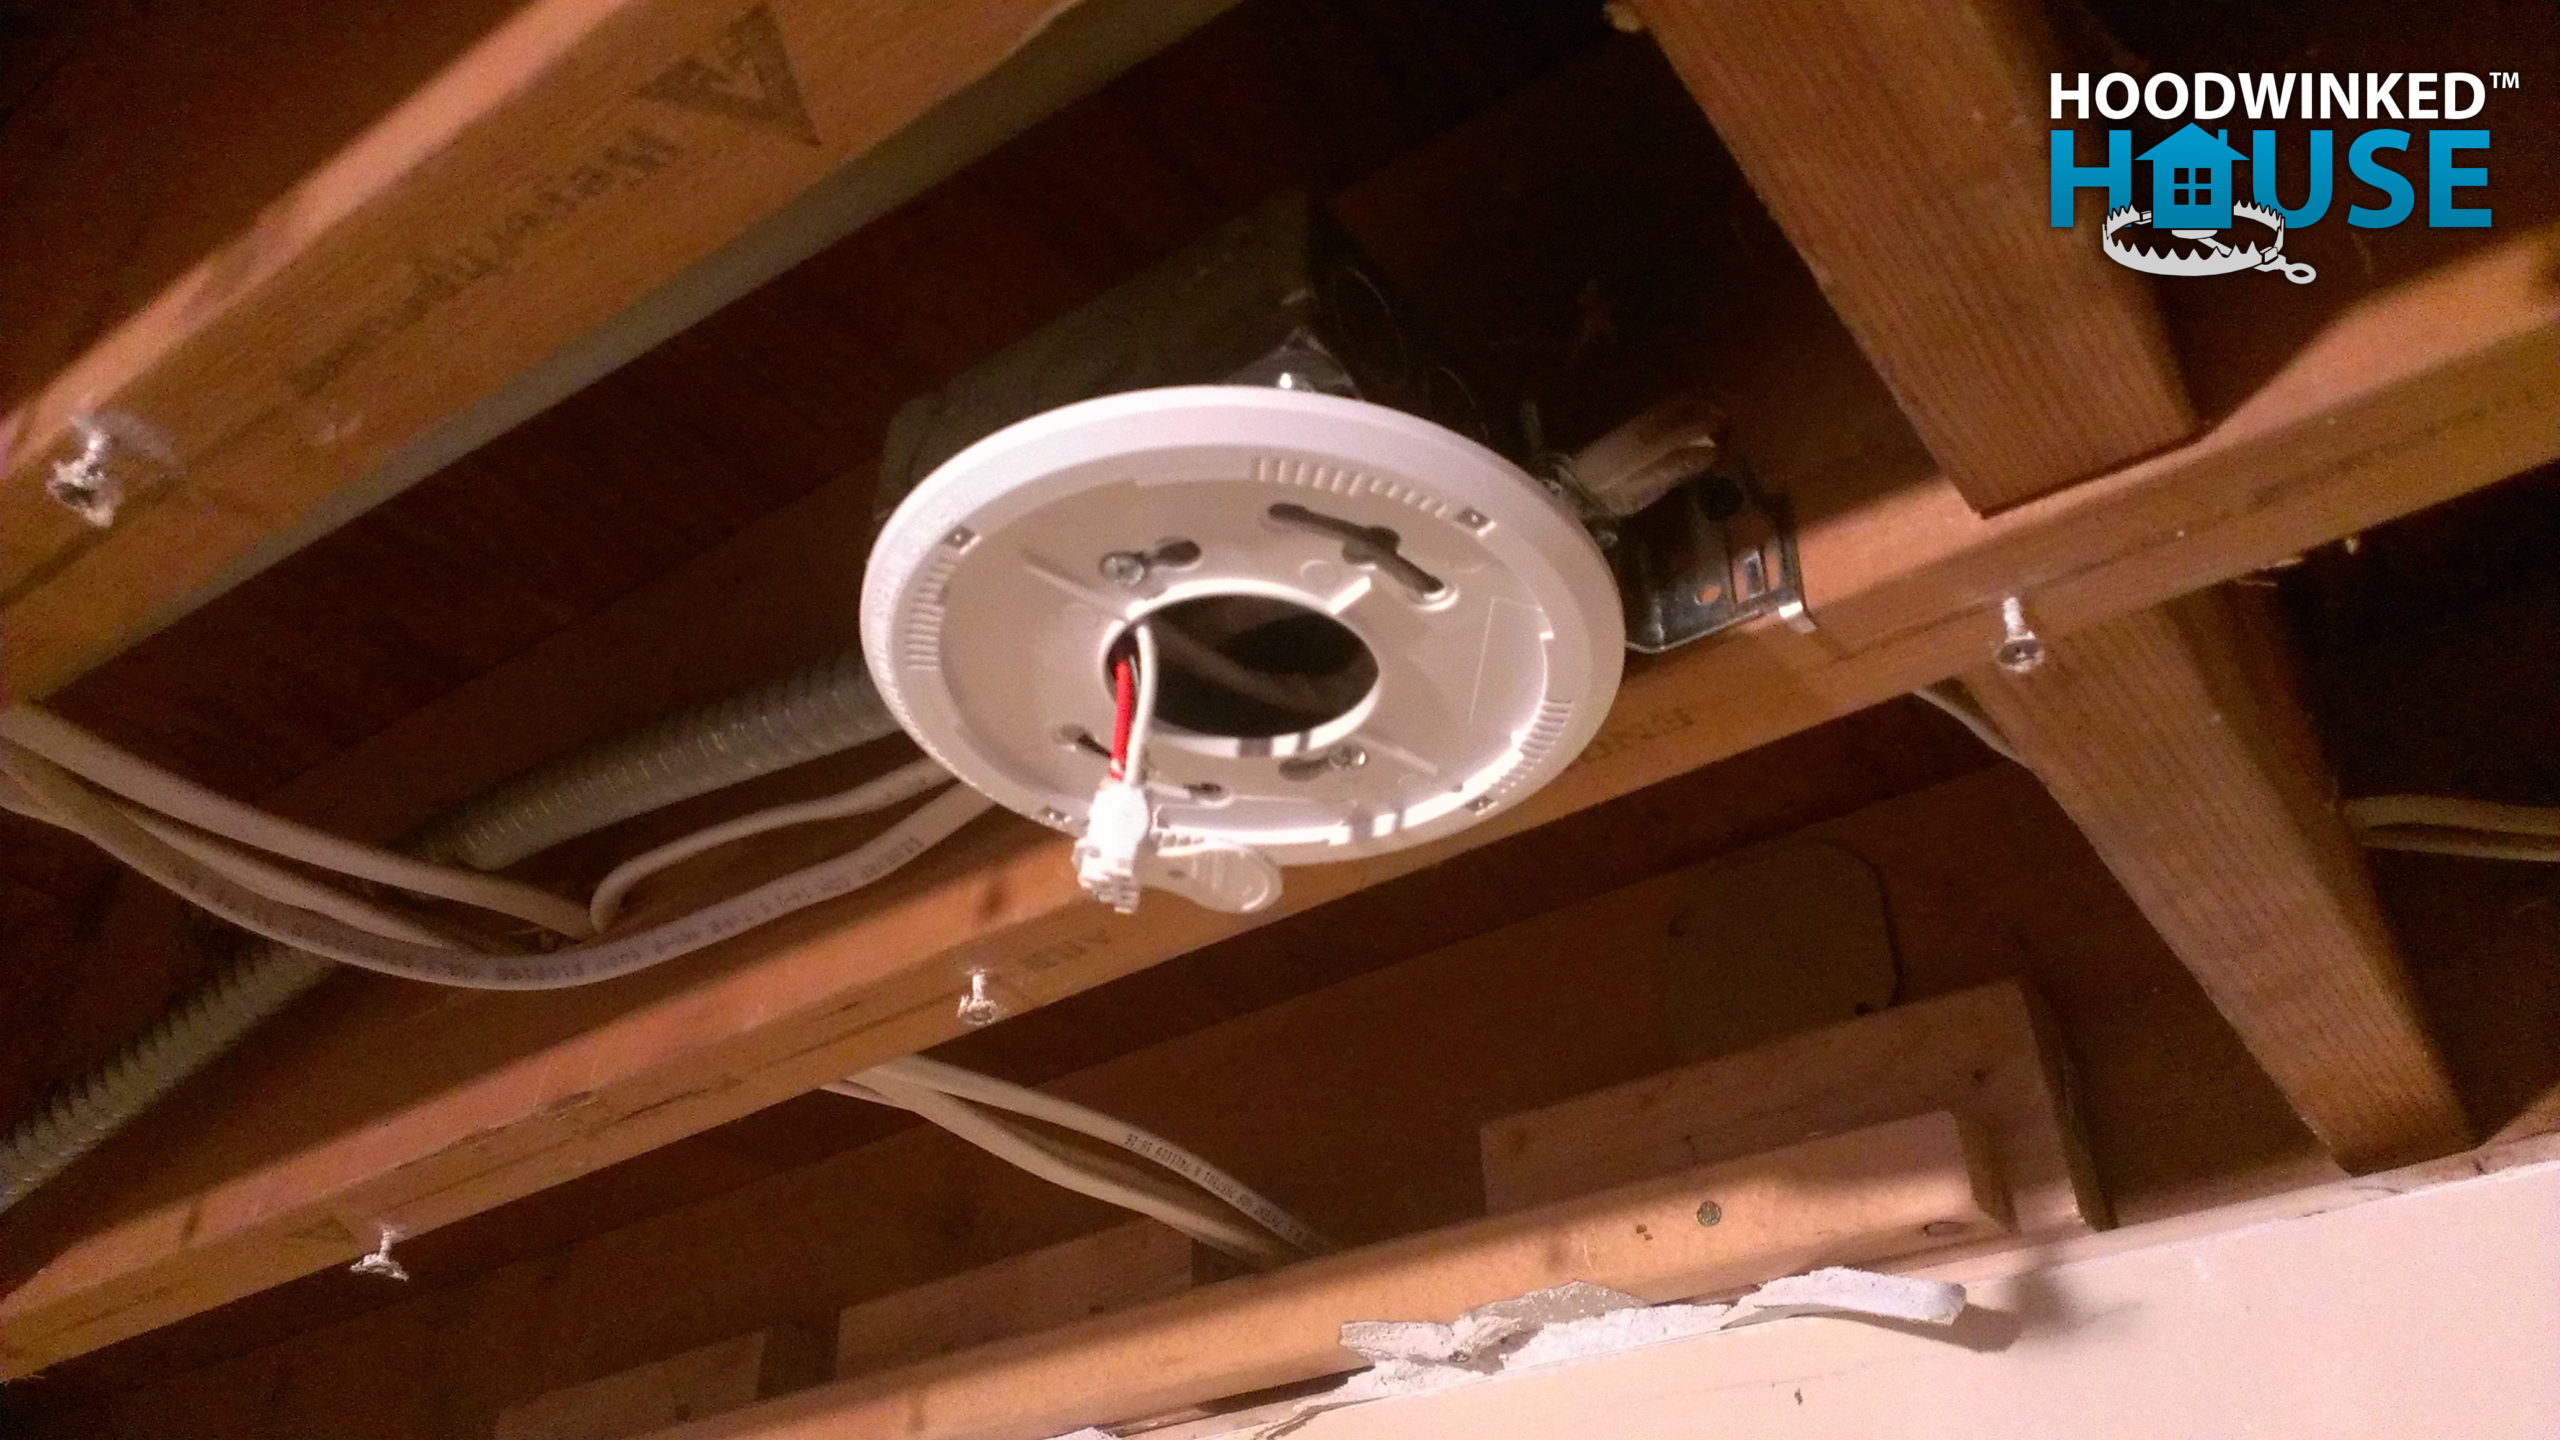 New construction smoke alarms must be interconnected per building code. A mounting plate is shown here wired into a basement ceiling junction box.